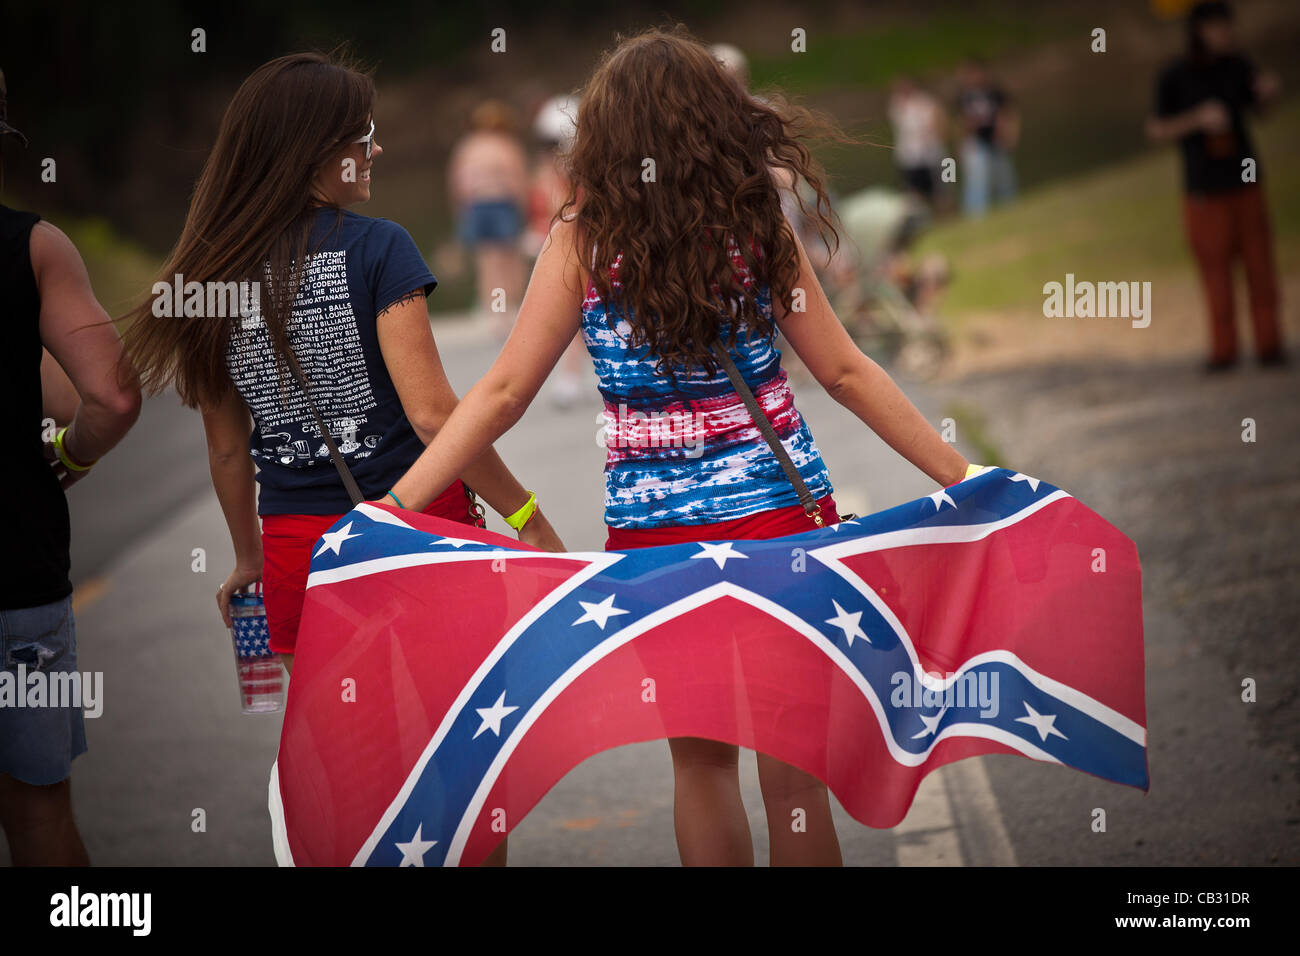 Two young women with a confederate flag at the Summer Redneck Games on May 26, 2012 in East Dublin, Georgia. The games honor the southern red neck culture. Stock Photo